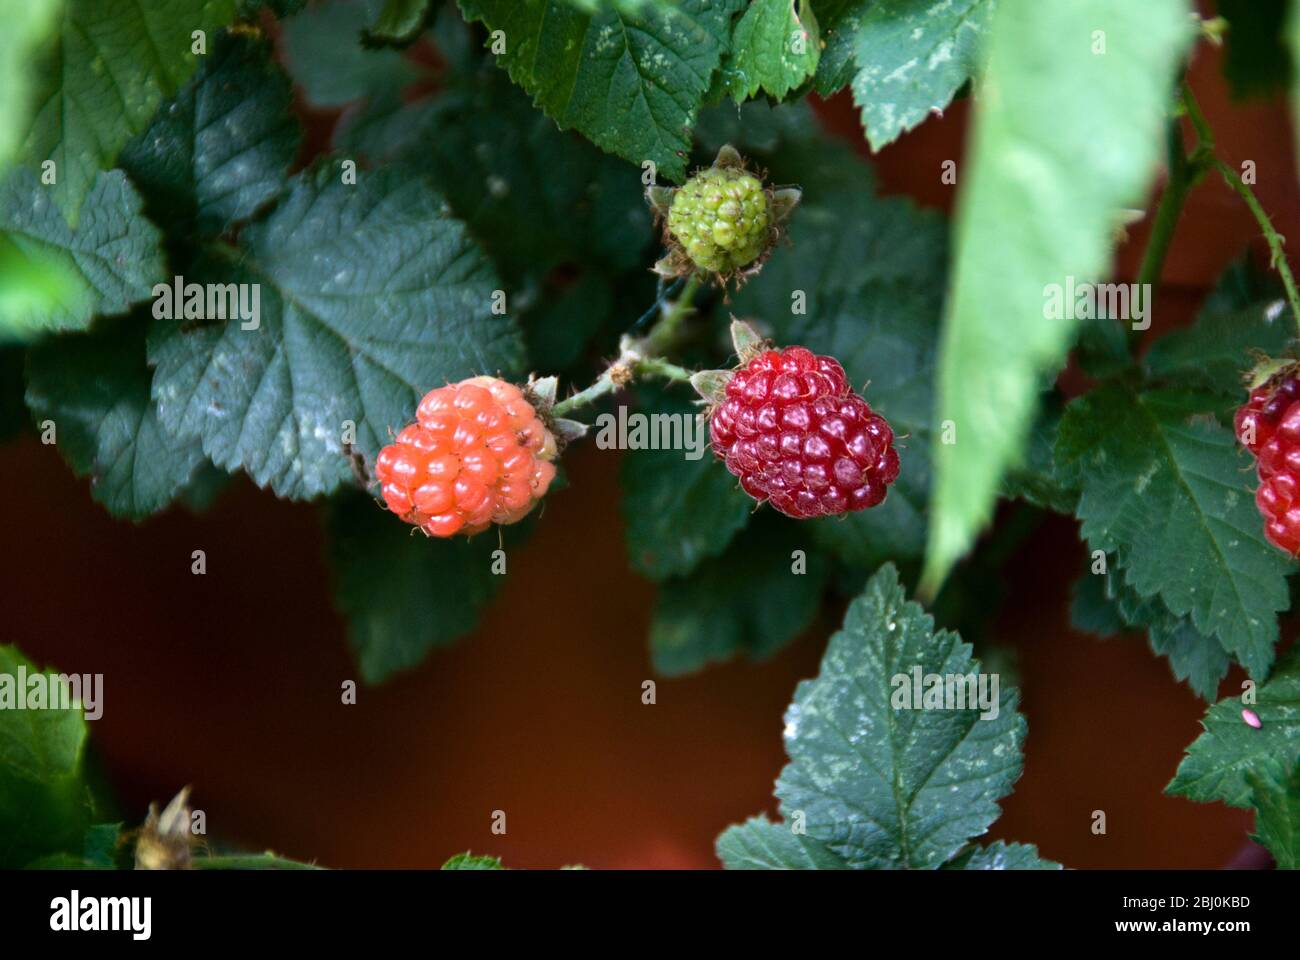 Detail of tayberries growing. Tayberries are a sweet dark red berry that is a cross between a blackberry and a raspberry - Stock Photo